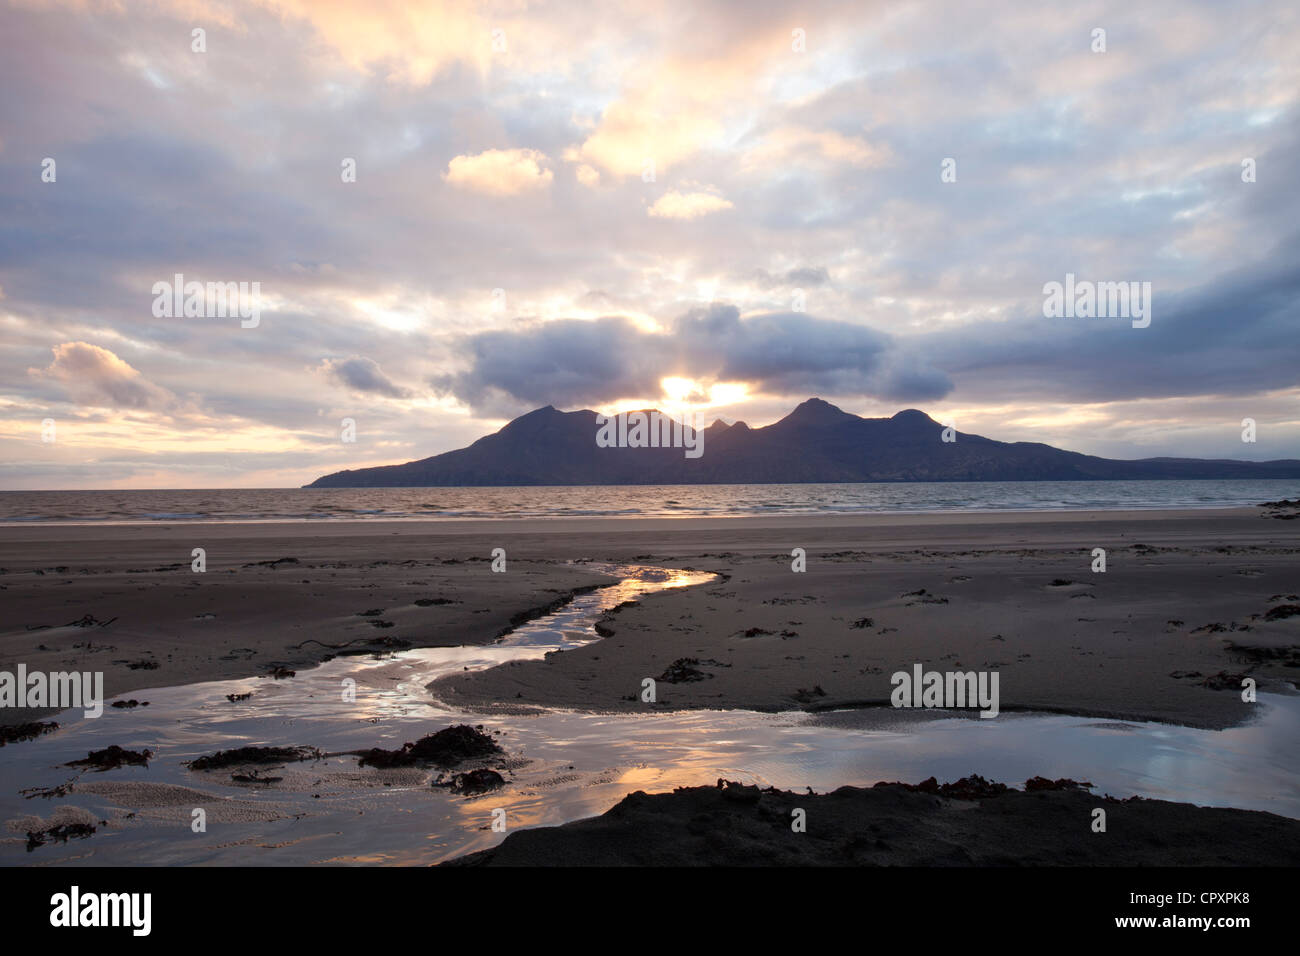 The Bay of Laig at Cleadale on the Isle of Eigg, looking towards the Isle of Rhum, Scotland, UK at sunset. Stock Photo